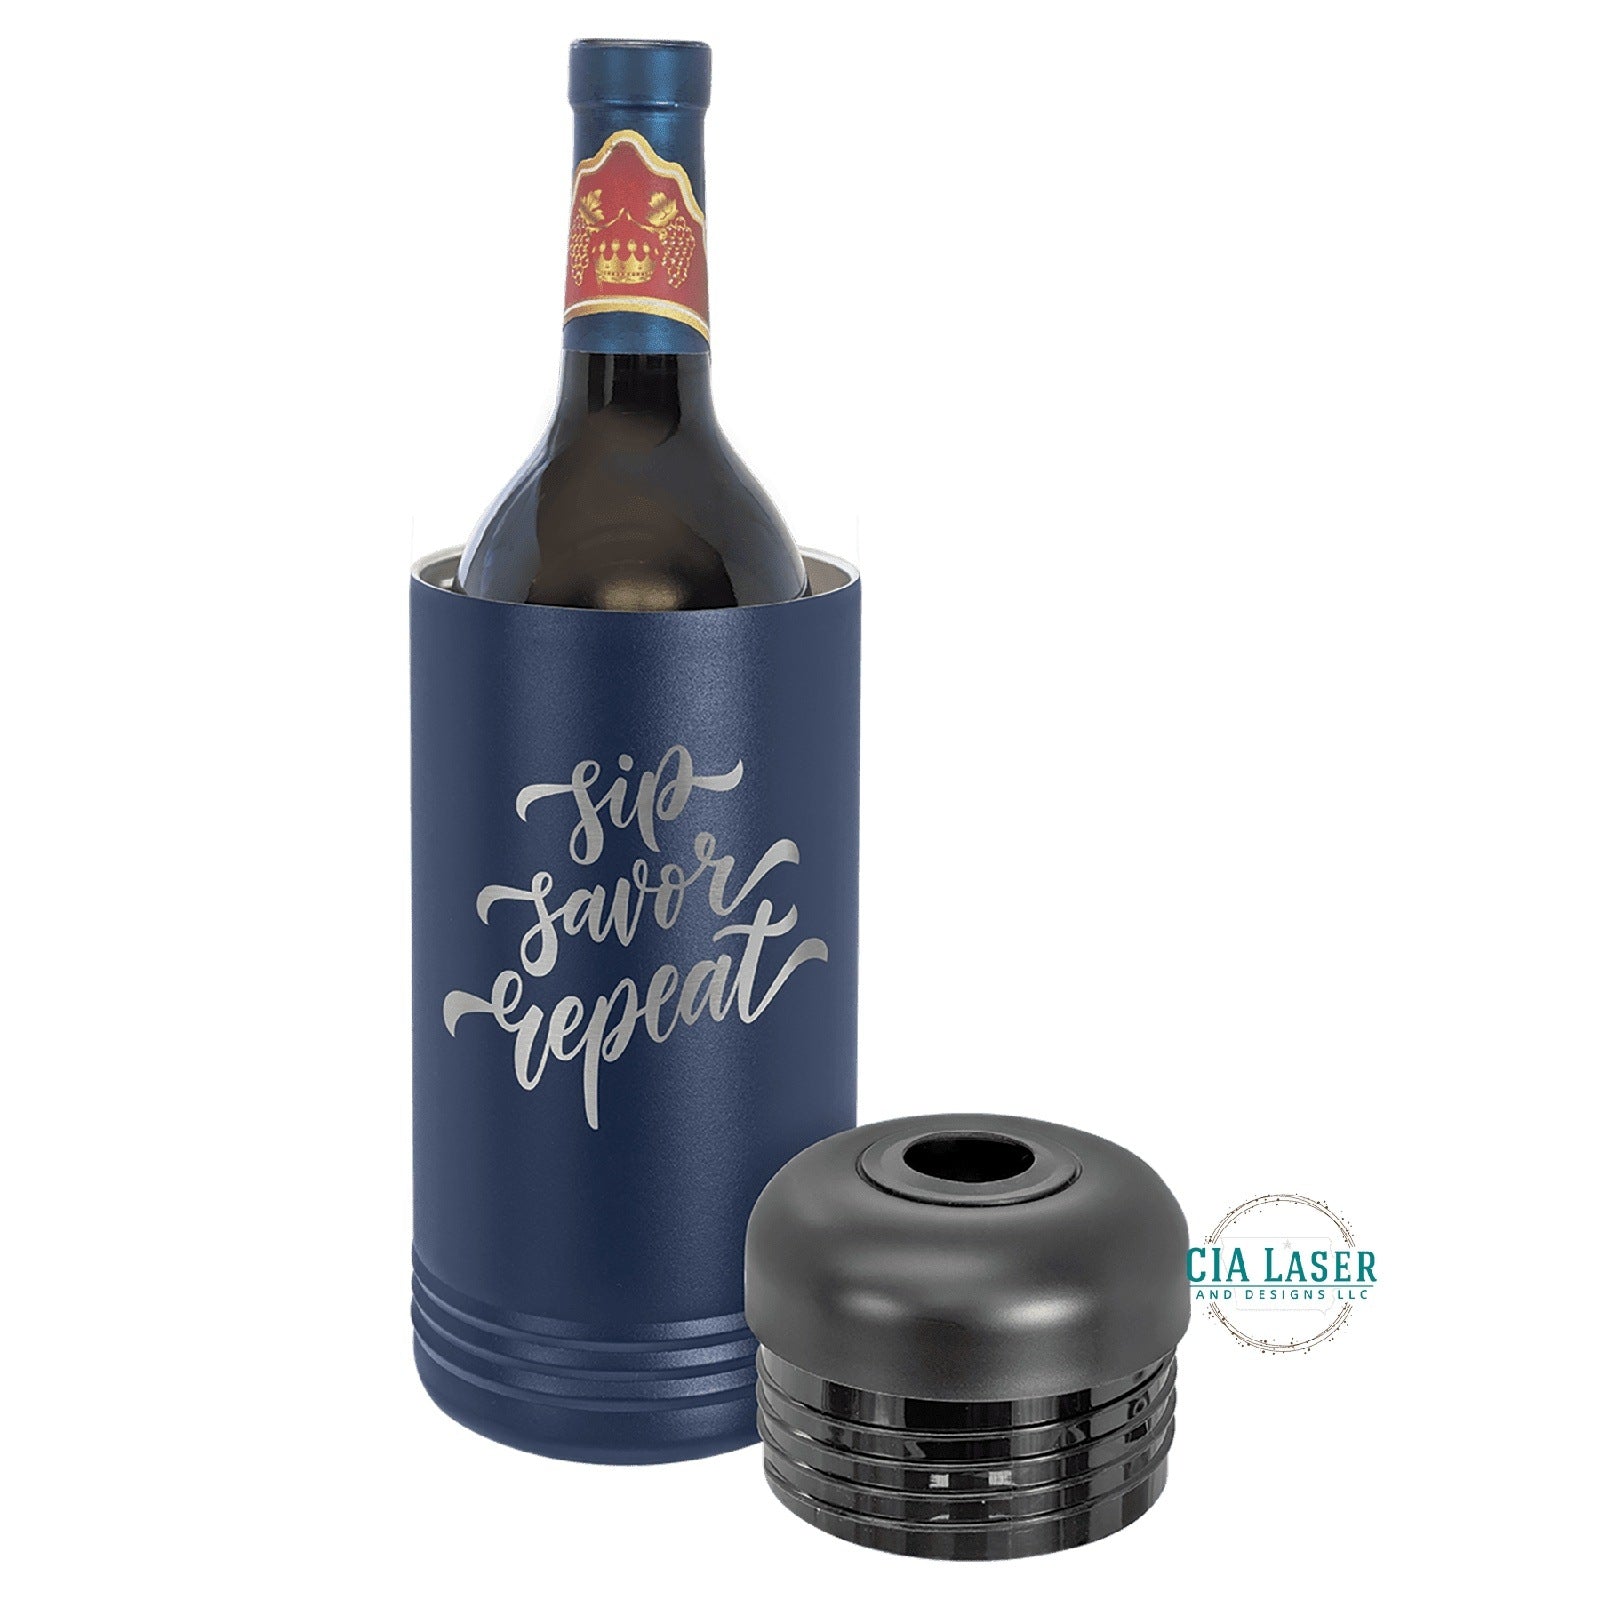 Personalized Wine Cooler, Engraved Wine Cooler, Wine Cooler, Insulated Wine Cooler, Insulated Wine Chiller